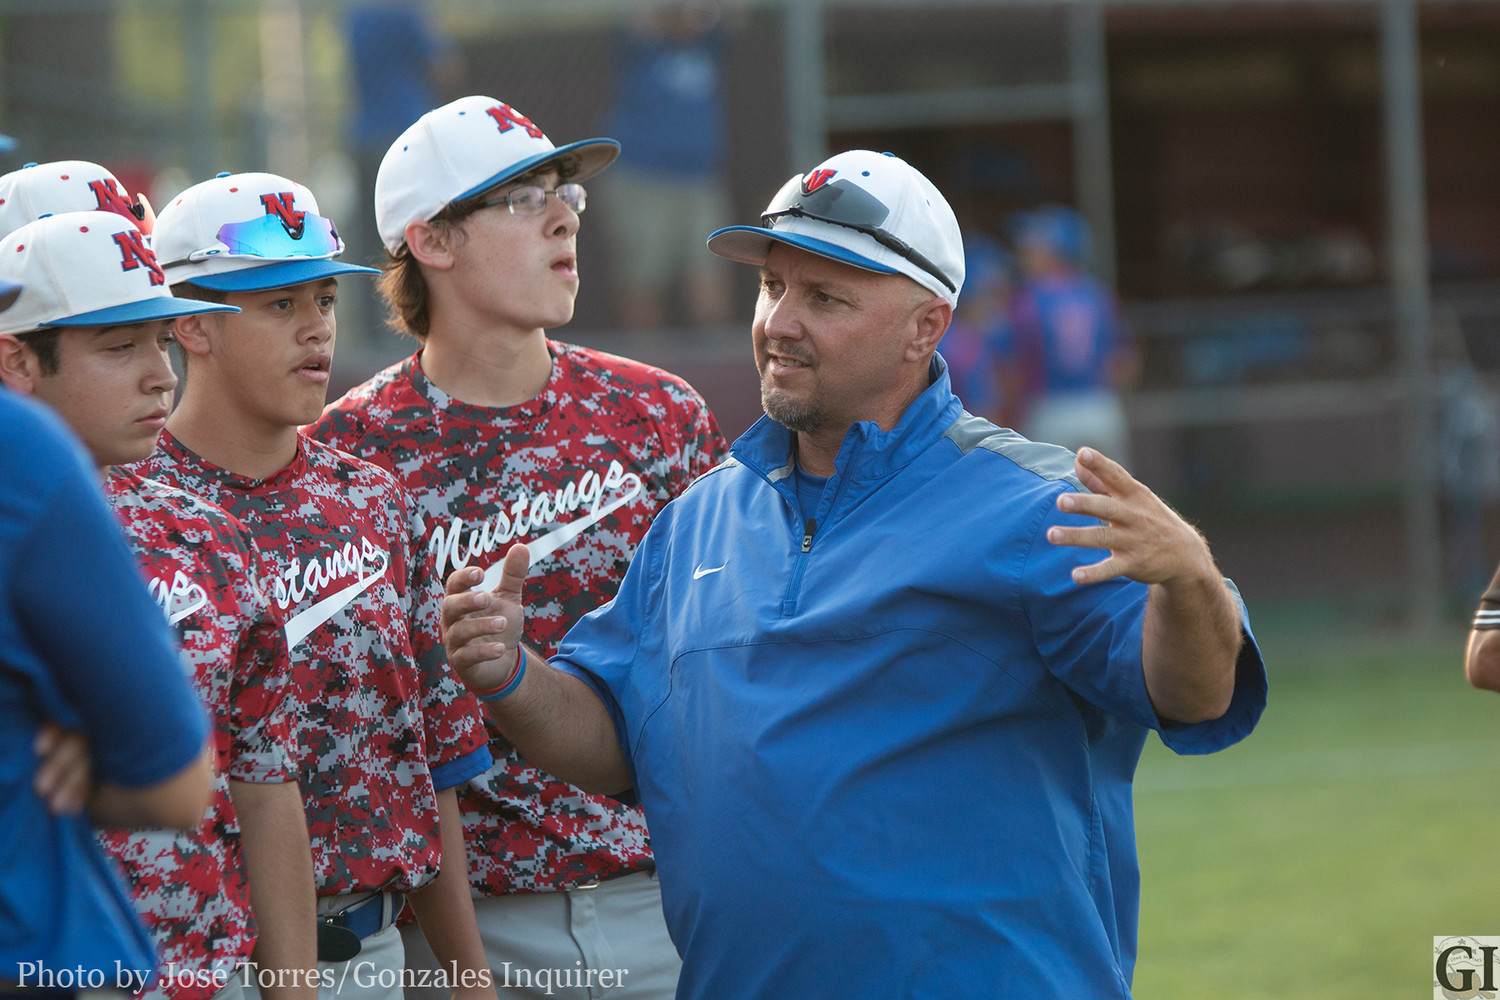 Head Coach Bobby Newman announced after the series that Saturday was his last game as baseball coach for Nixon-Smiley. Newman has been head baseball coach for the Mustangs for the last nine years.